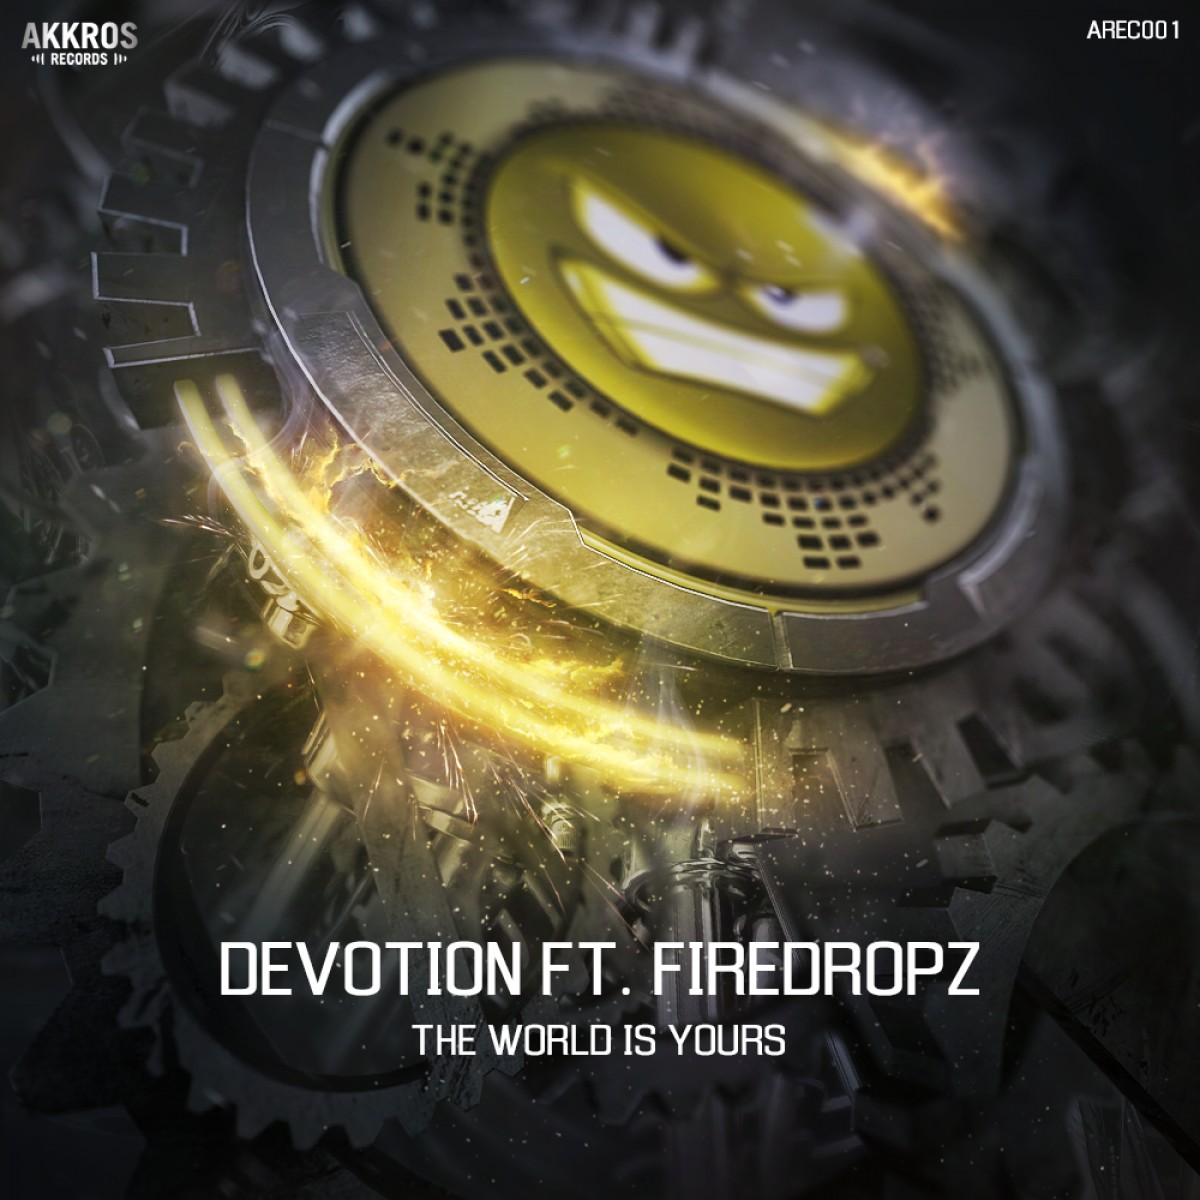 Devotion ft. Firedropz ‎– The World Is Yours